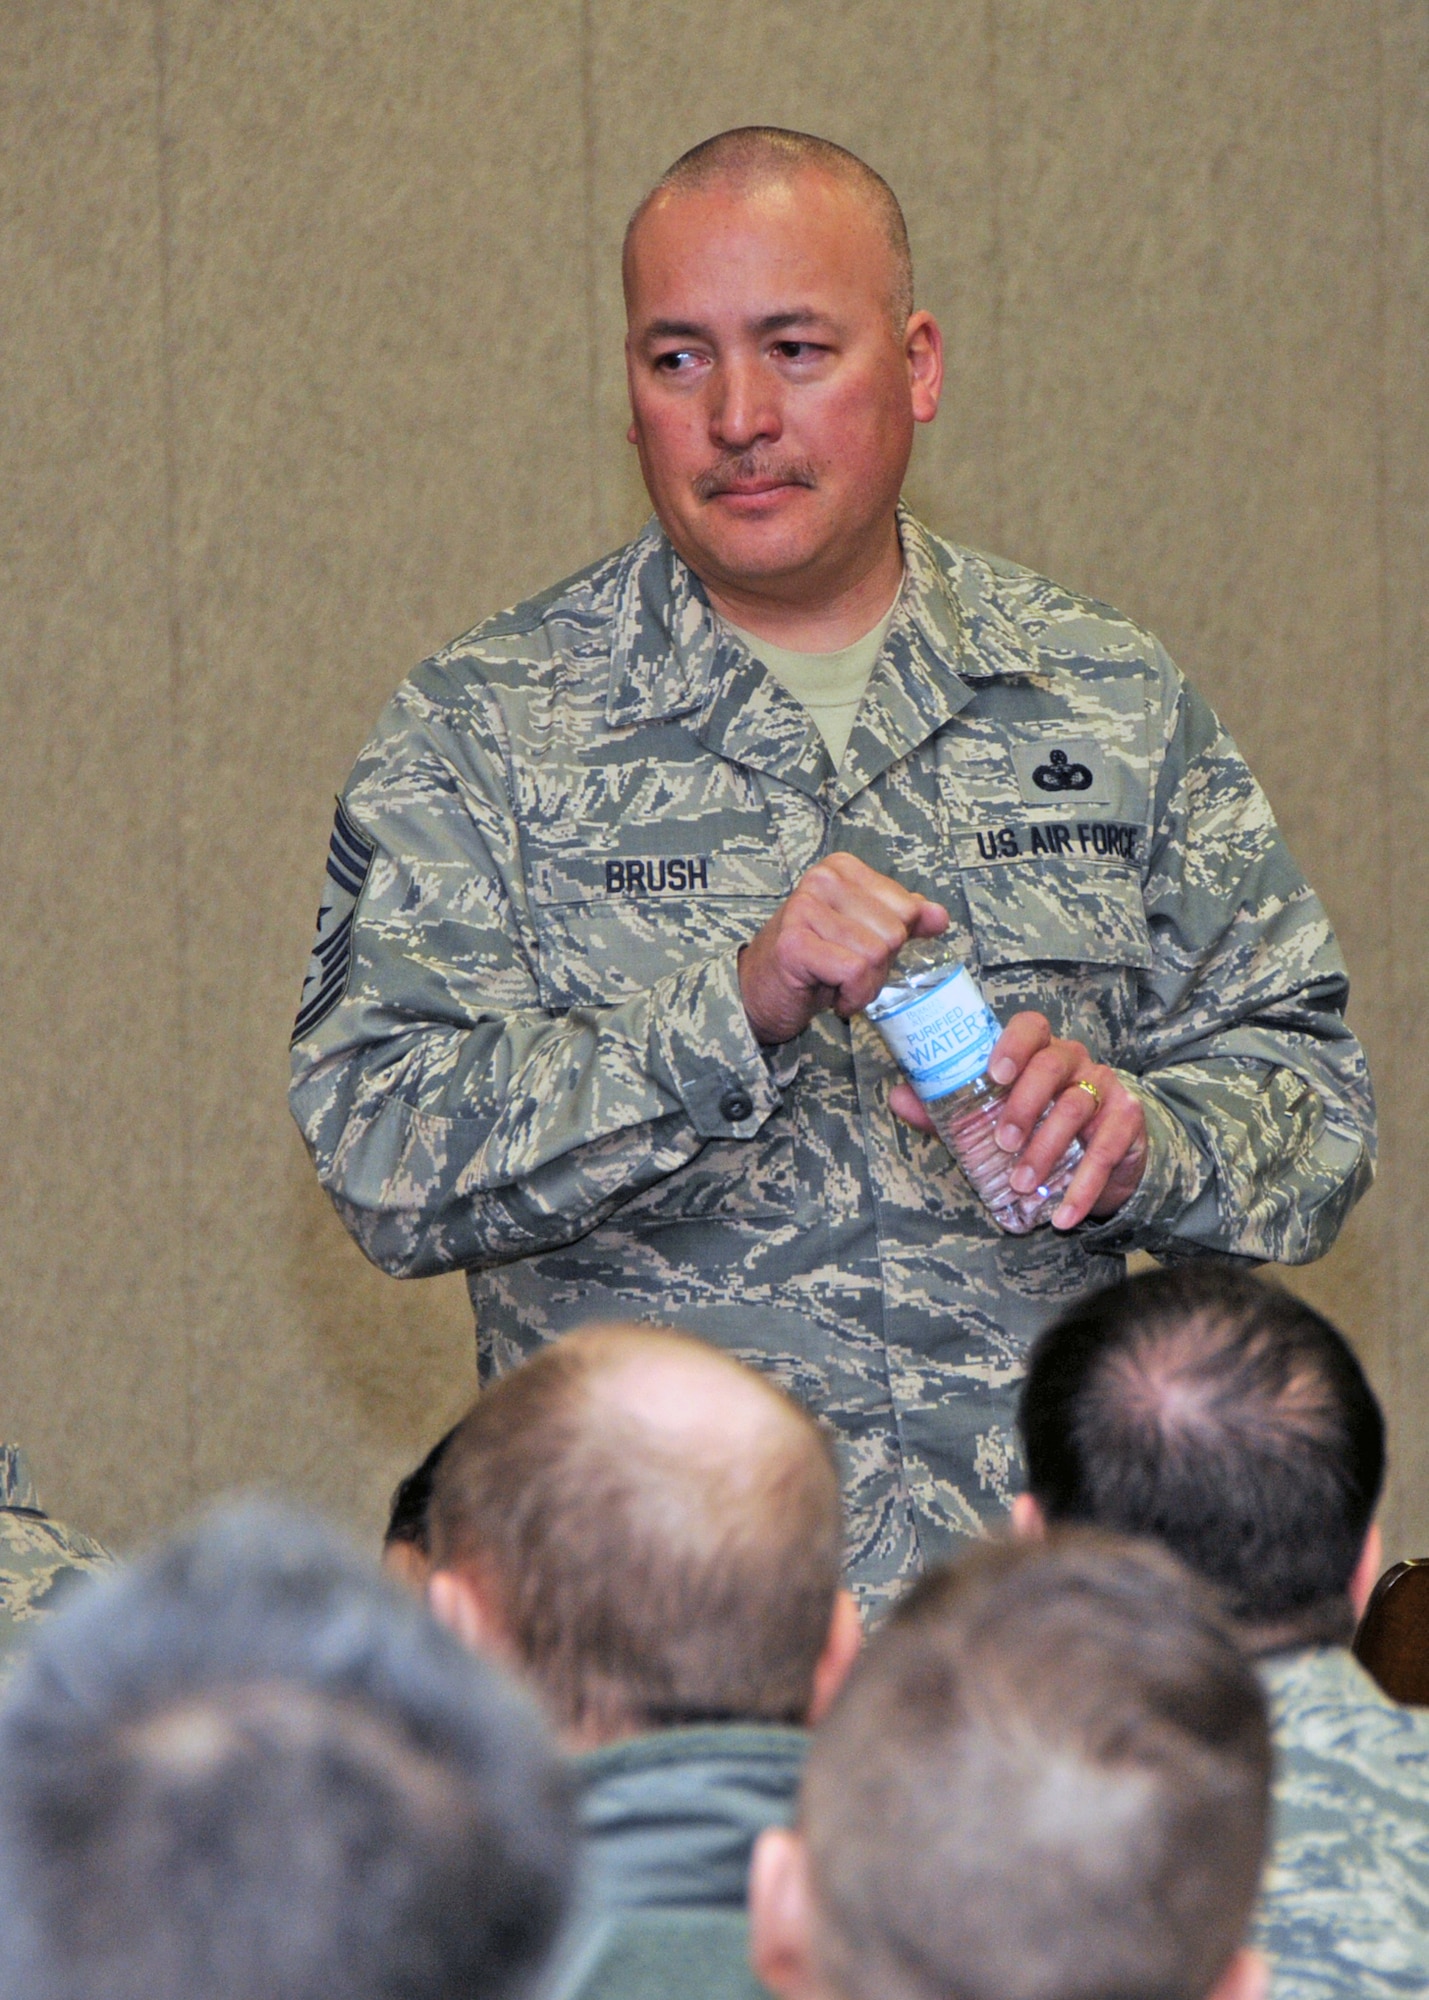 Chief Master Sergeant Brush, Senior Enlisted Advisor to the Chief, National Guard Bureau, held a town hall meeting with the Enlisted men and women of the 143d Airlift Wing and the 102d Network Warfare Squdron during his visit to Quonset Air National Guard Base. National Guard photo by Master Sgt Janeen Miller (RELEASED)